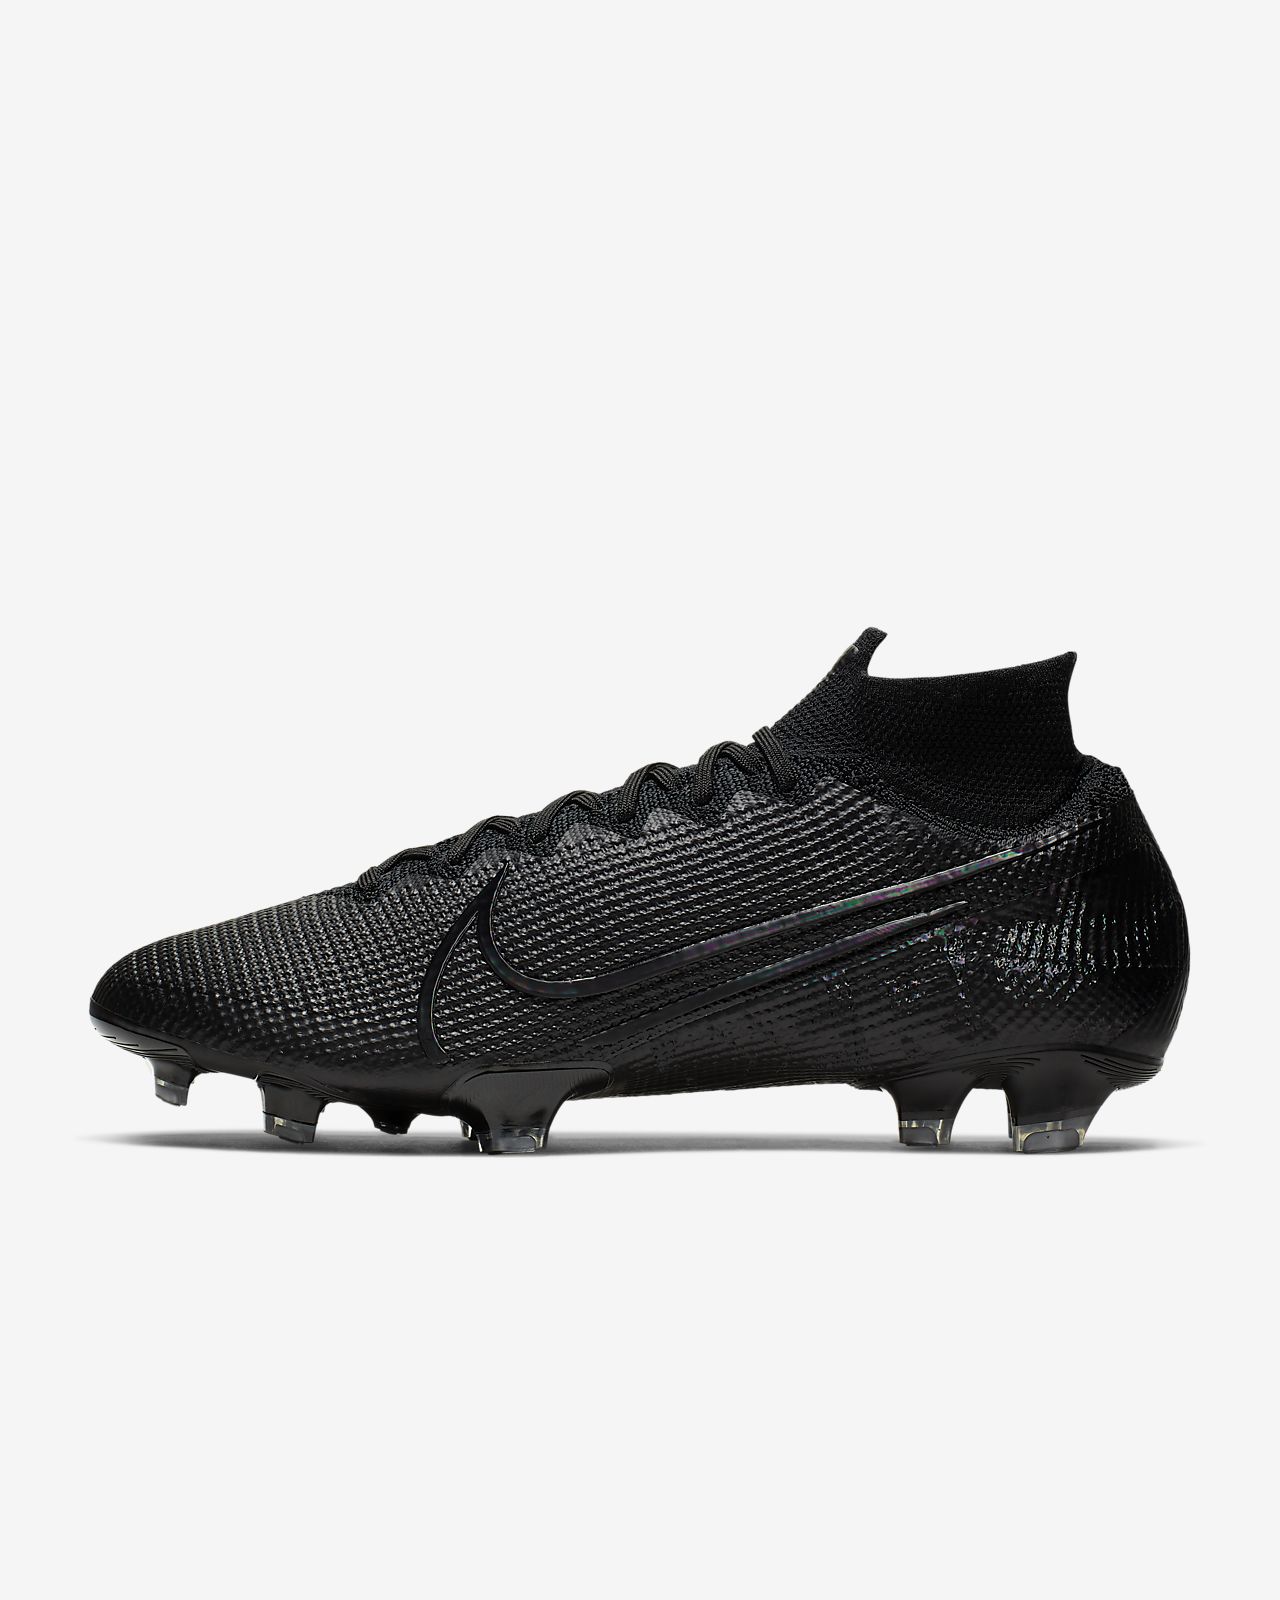 Nike Mercurial Superfly 7 Elite MDS FG Firm Ground Football.